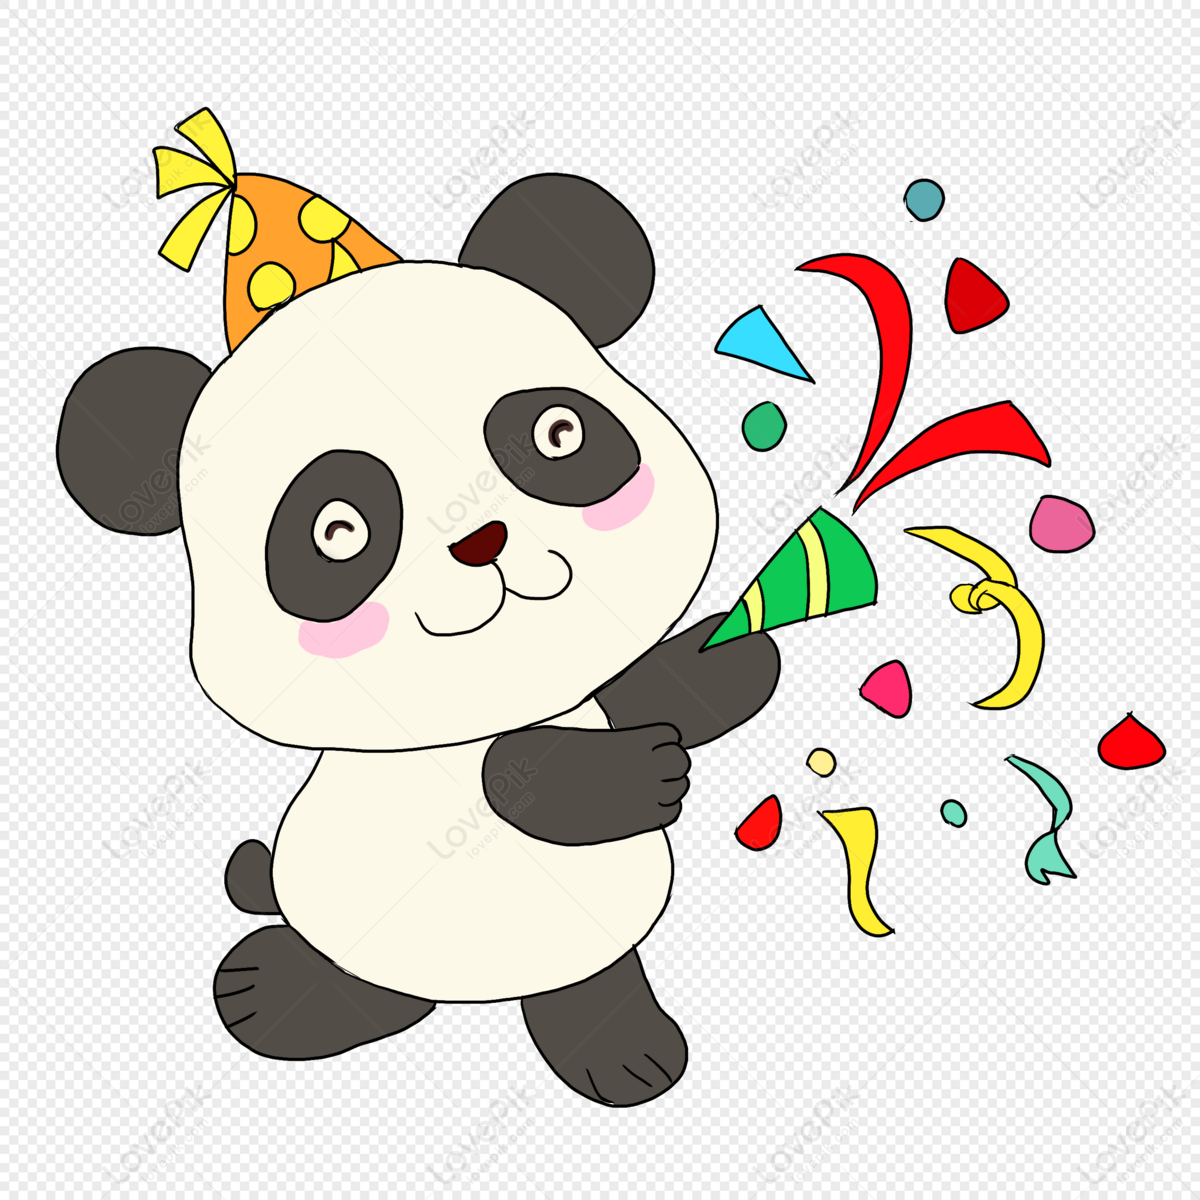 Little Panda PNG Hd Transparent Image And Clipart Image For Free ...